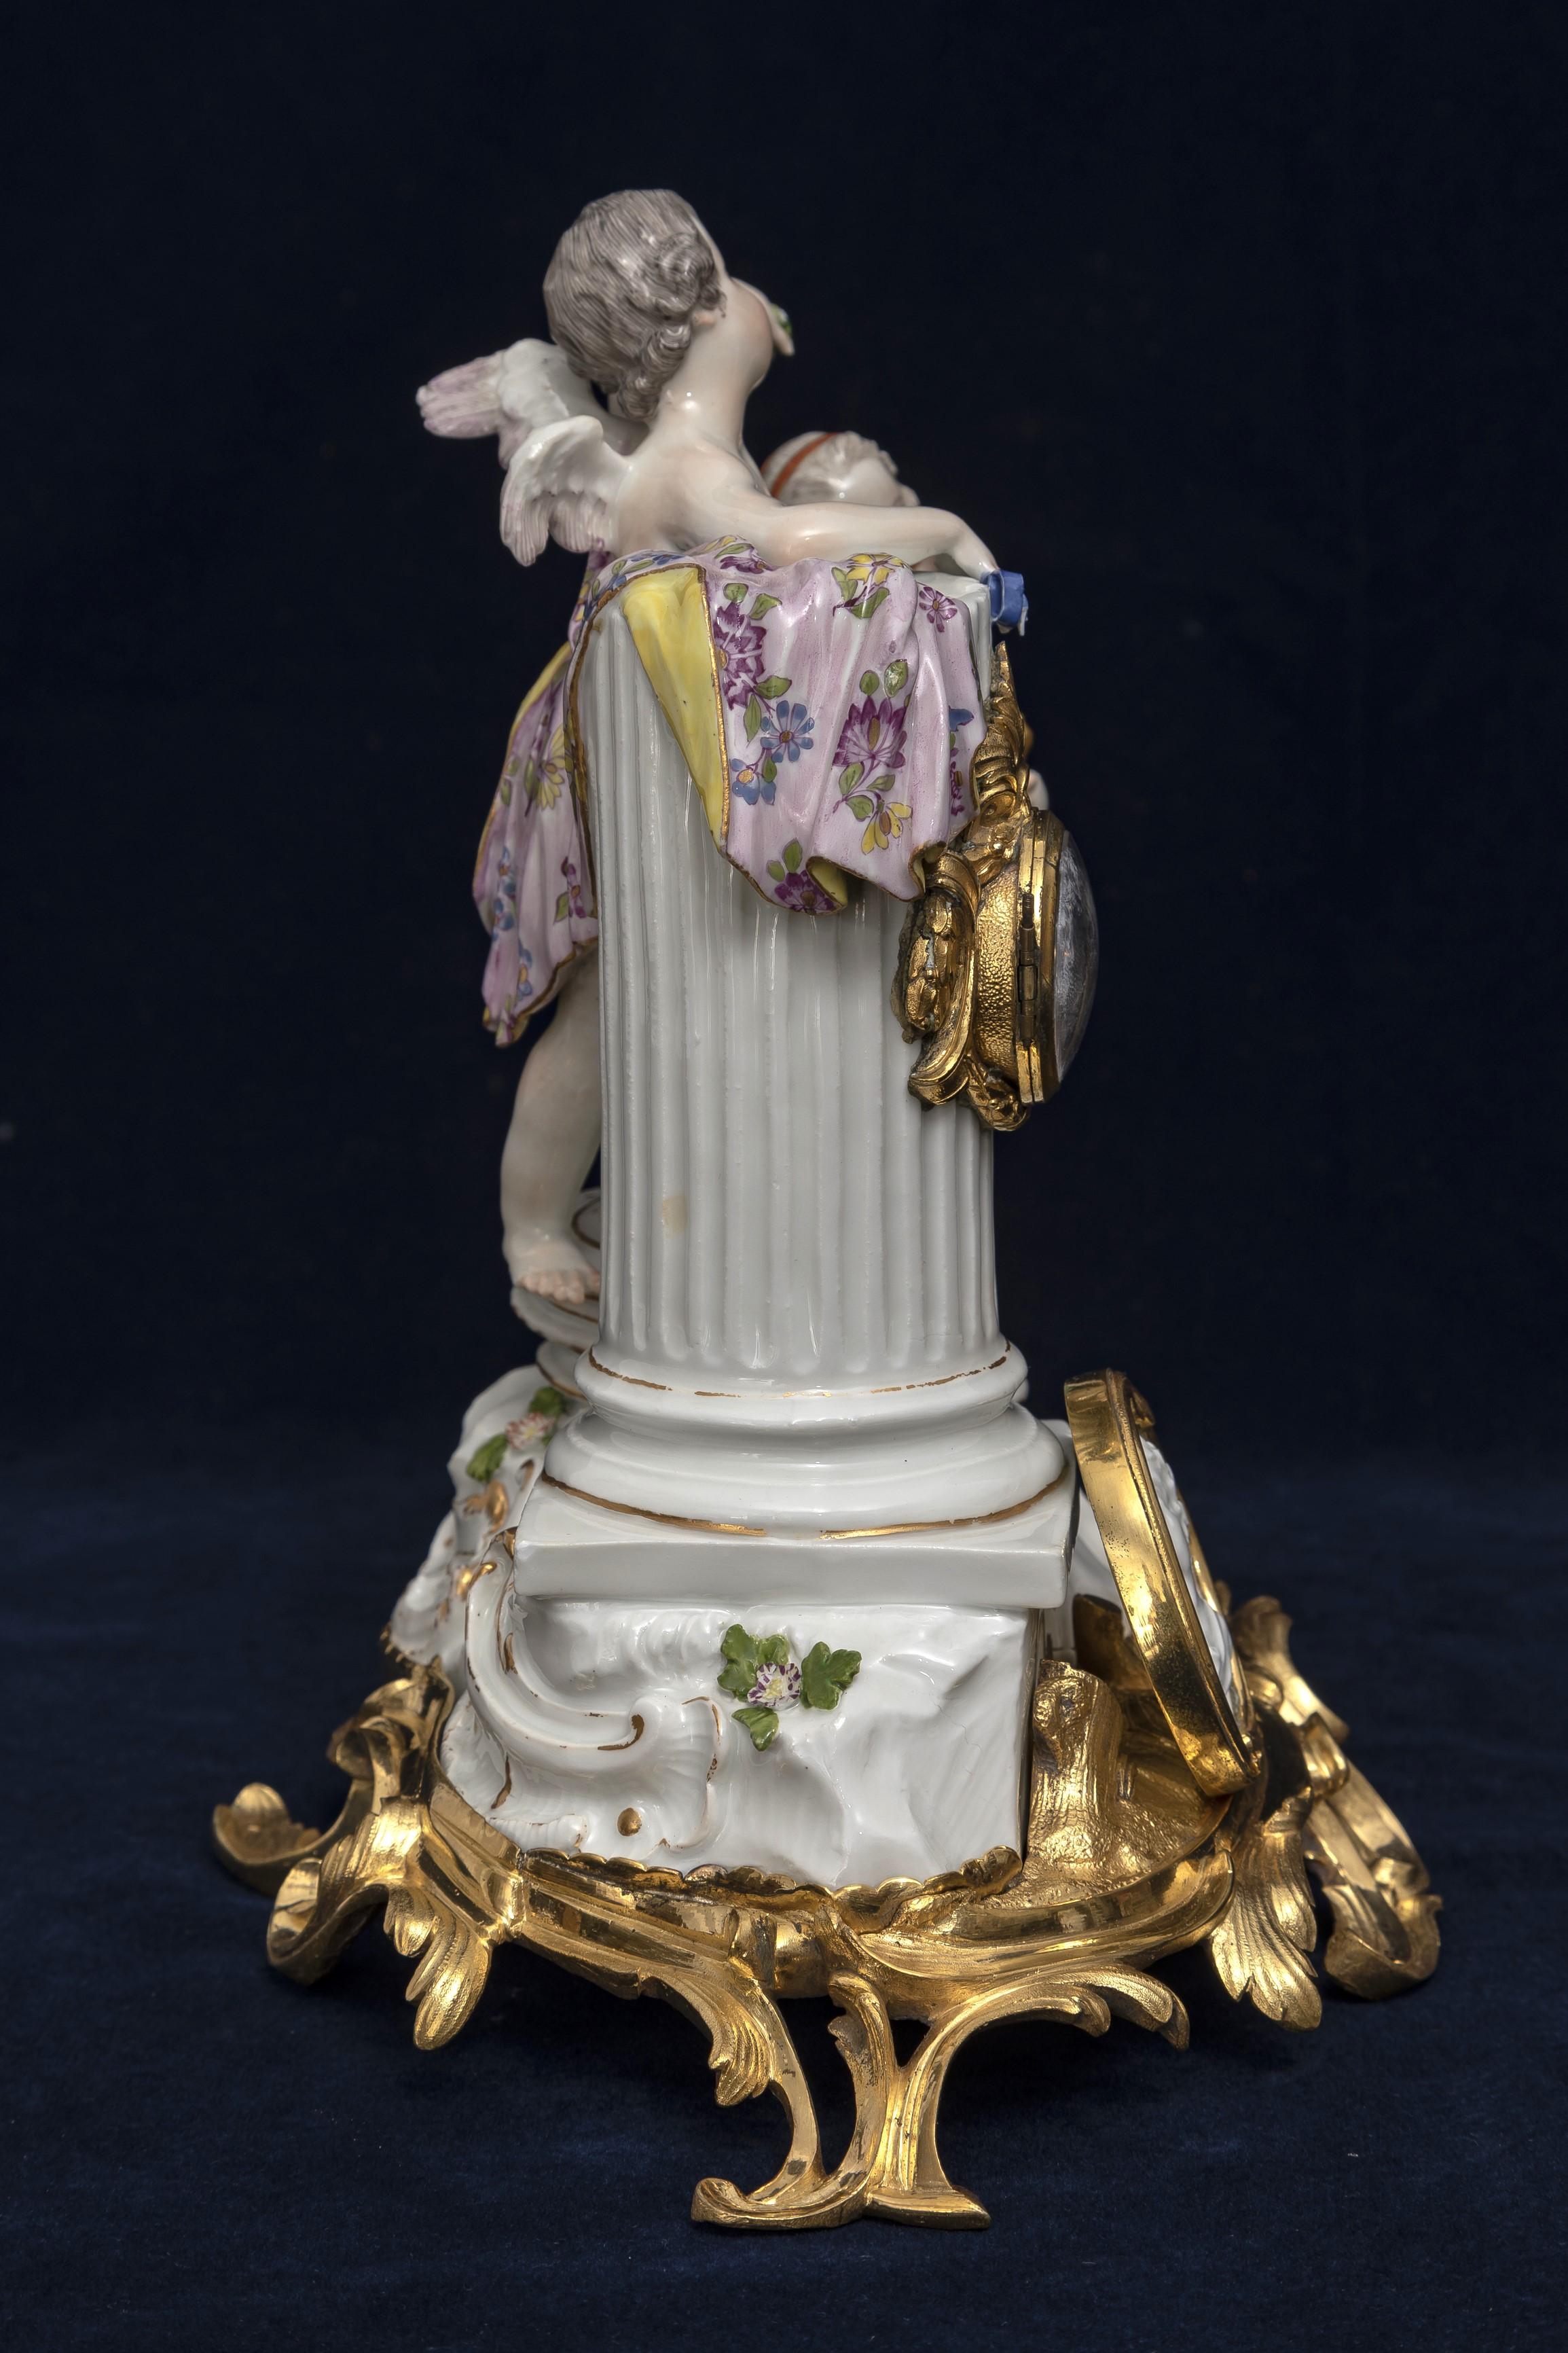 Hand-Crafted An Important Rare 18th C. Ormolu Mounted Meissen Porcelain Putti Clock Grouping For Sale